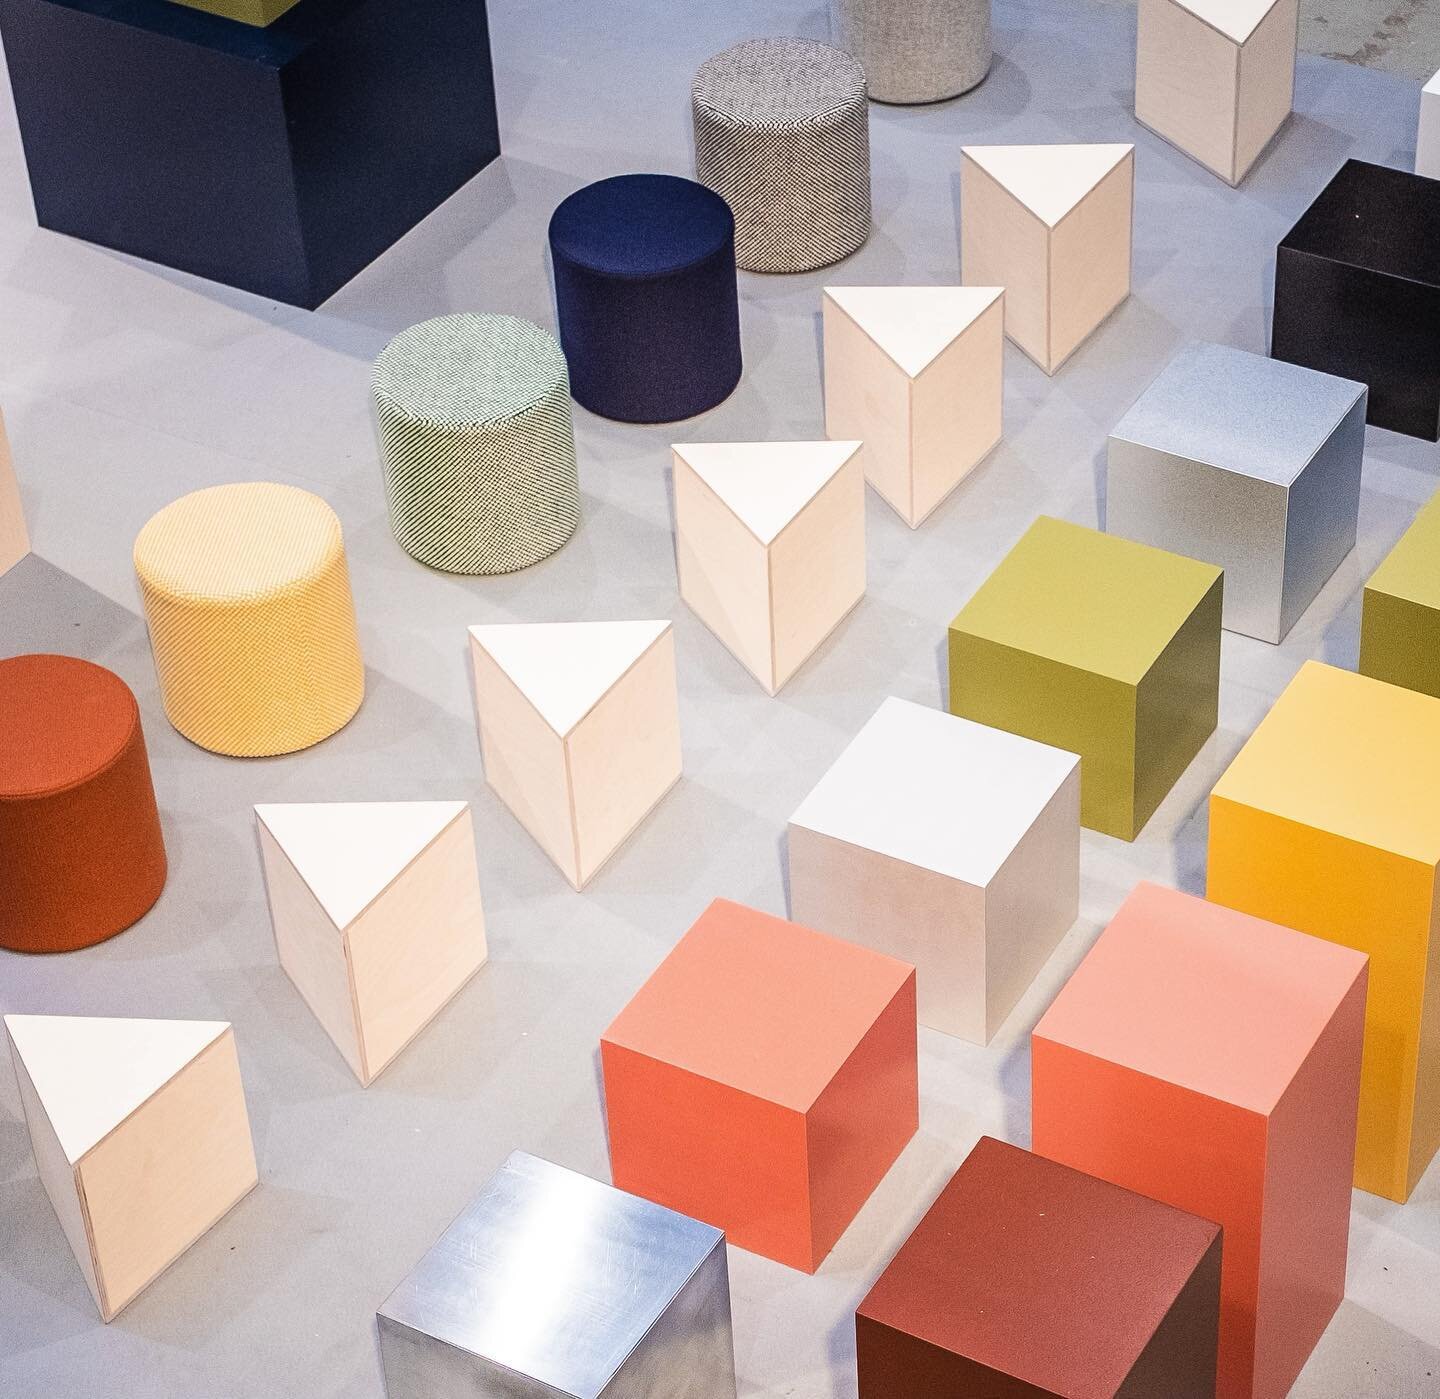 From our CMF (colour, materials and finish) installation in Stockholm where people were invited to have a go at finding their own combinations with upholstery, different woods, colours and more from our geometrical building blocks. @flokk_design 

📸